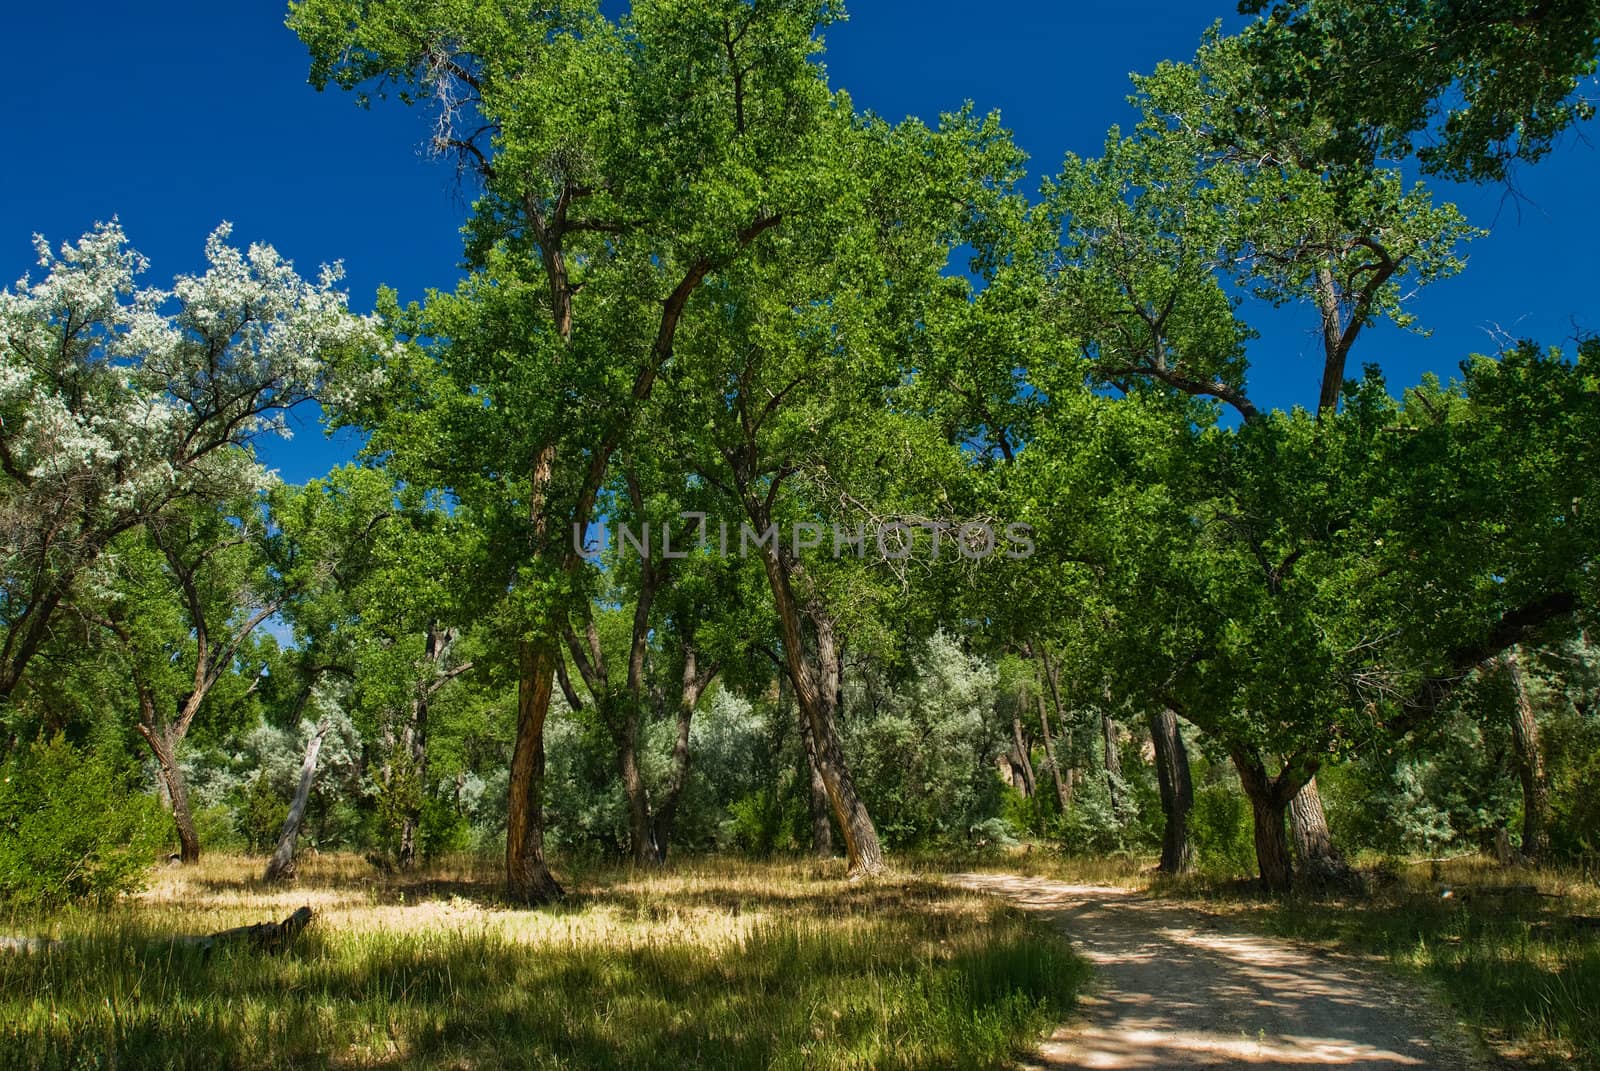 Path through an open forest with blue sky